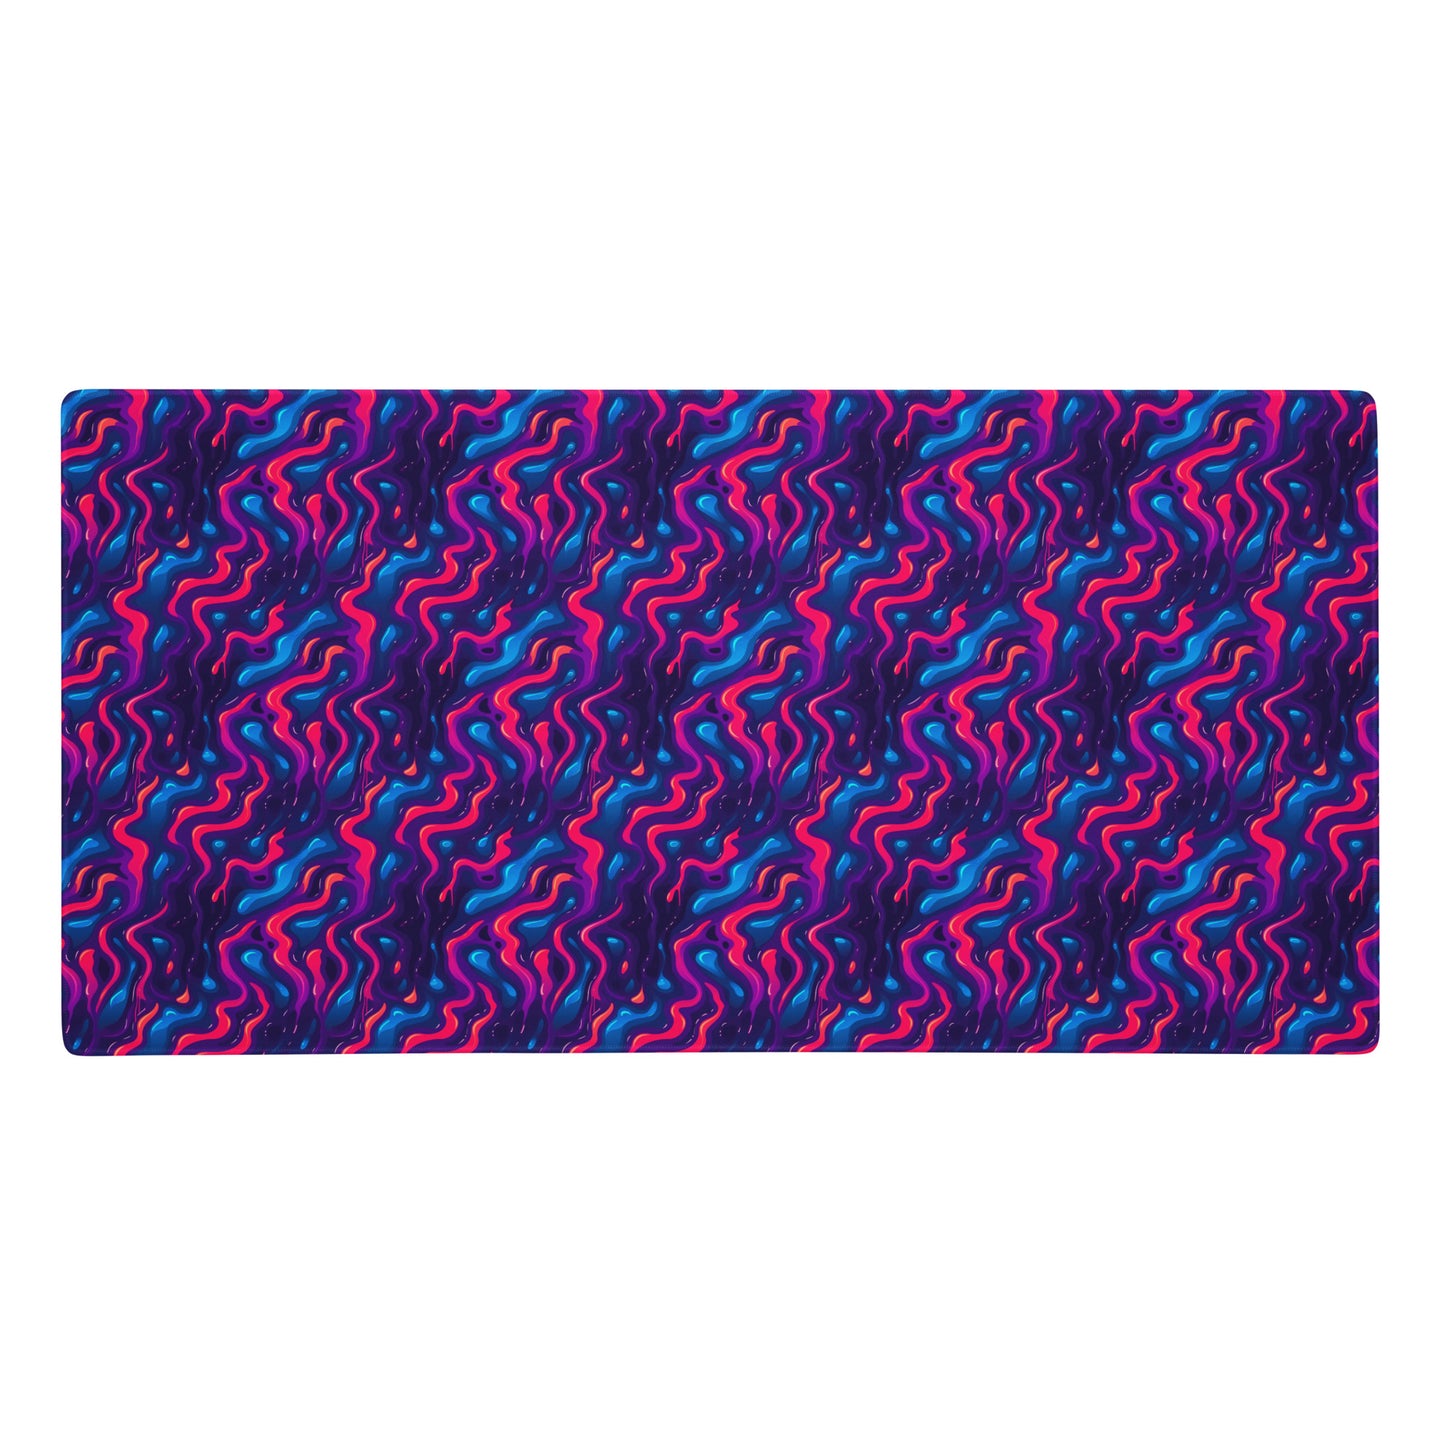 A 36" x 18" desk pad with a pink, blue and purple wavy pattern.